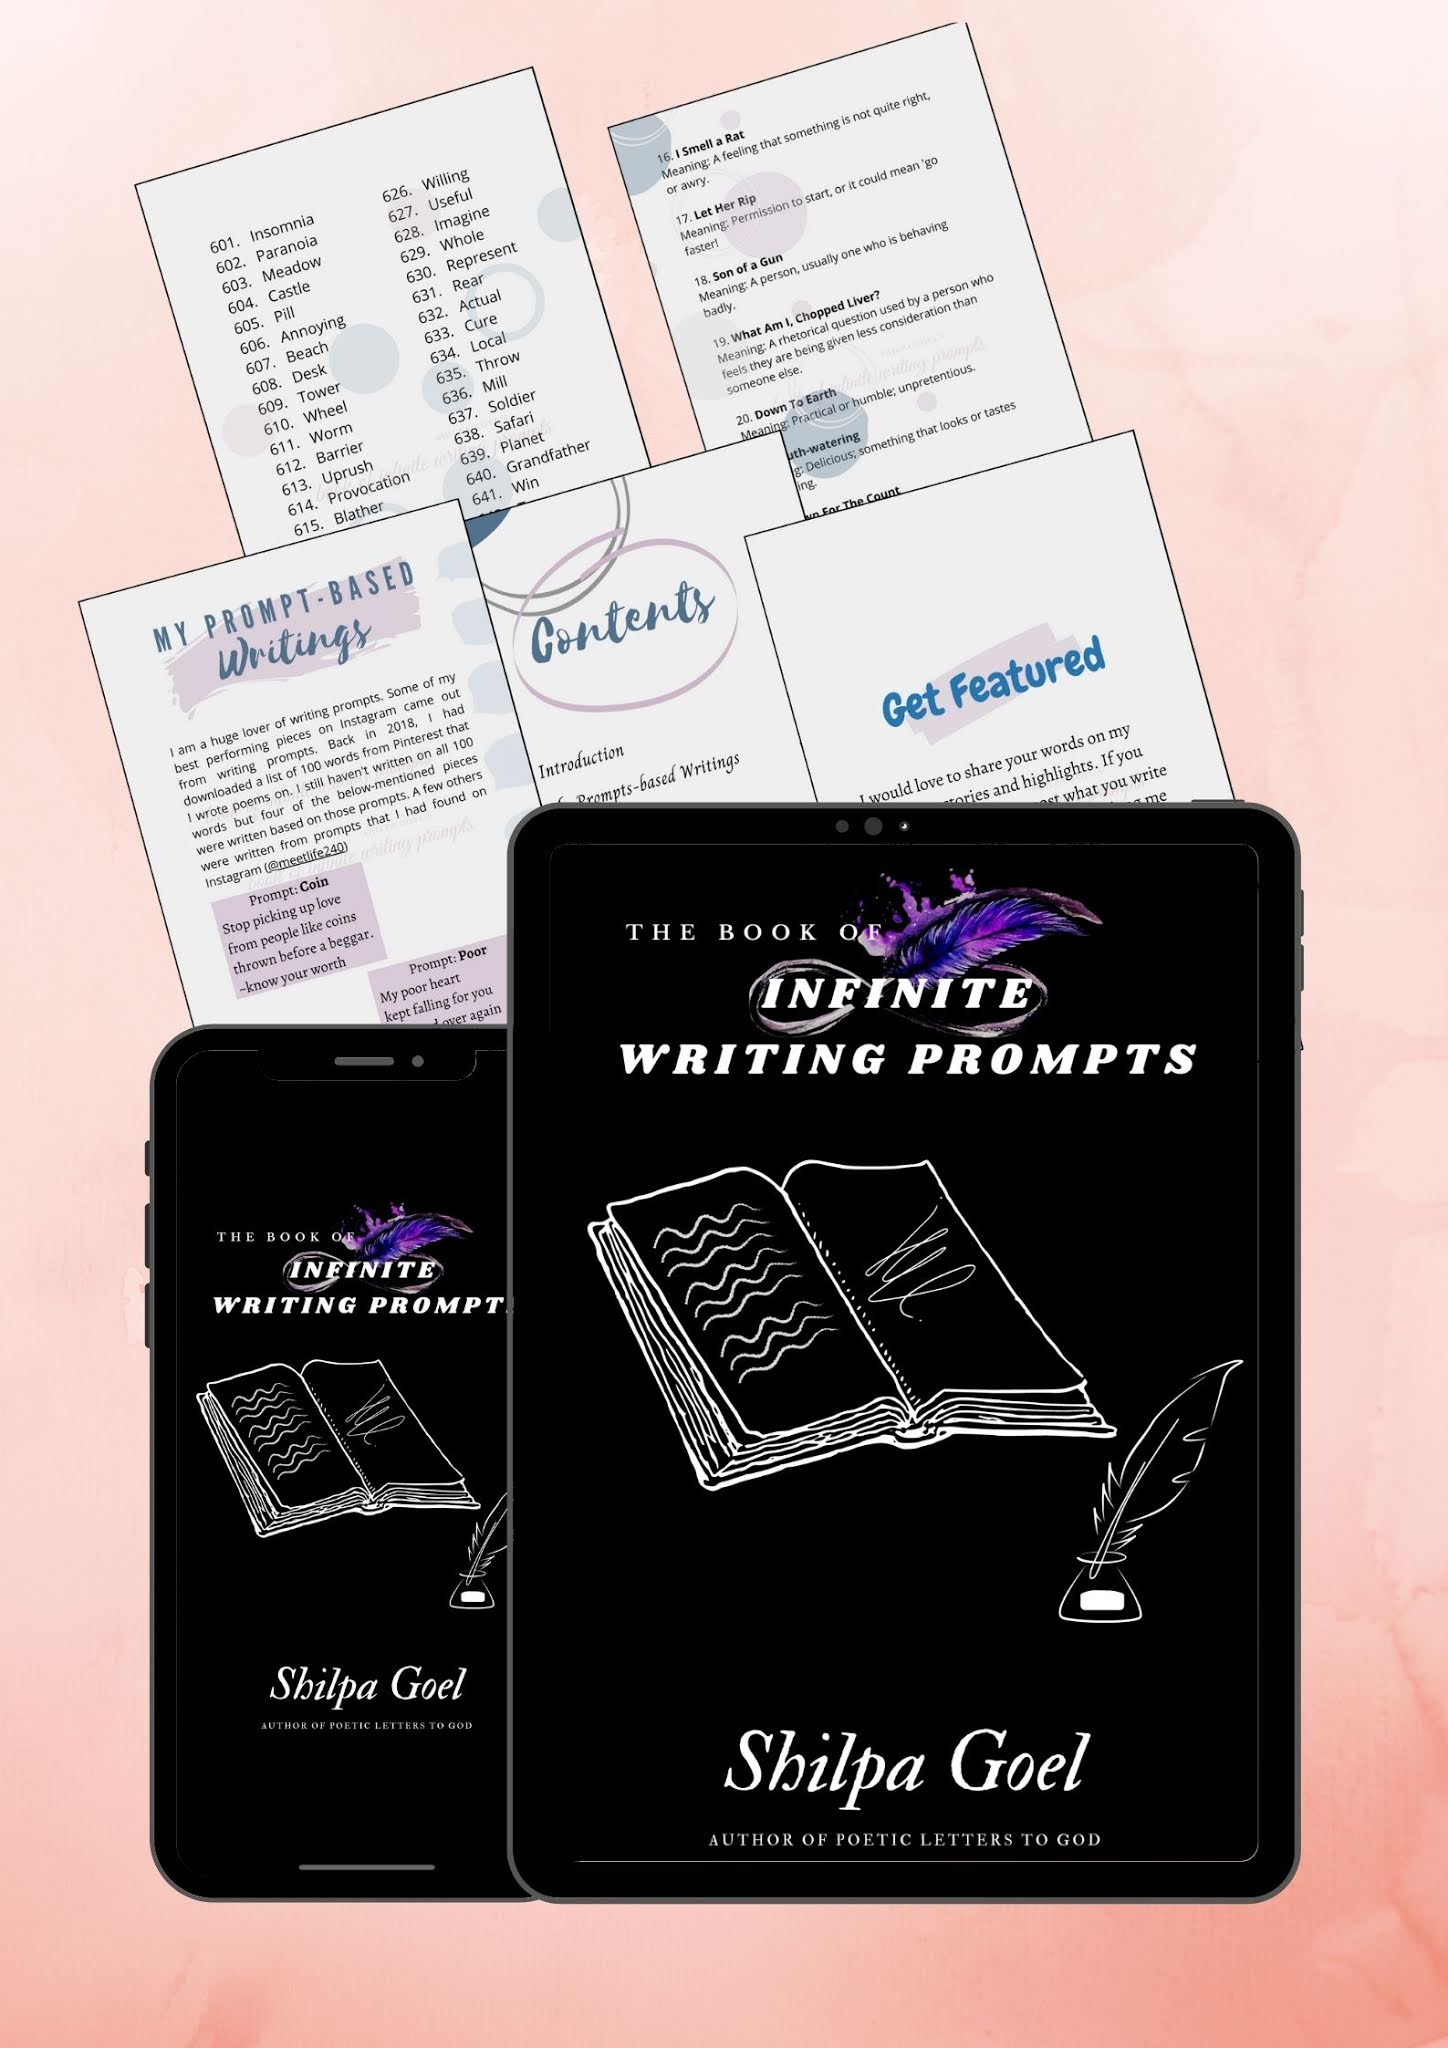 The Book of Infinite Writing Prompts